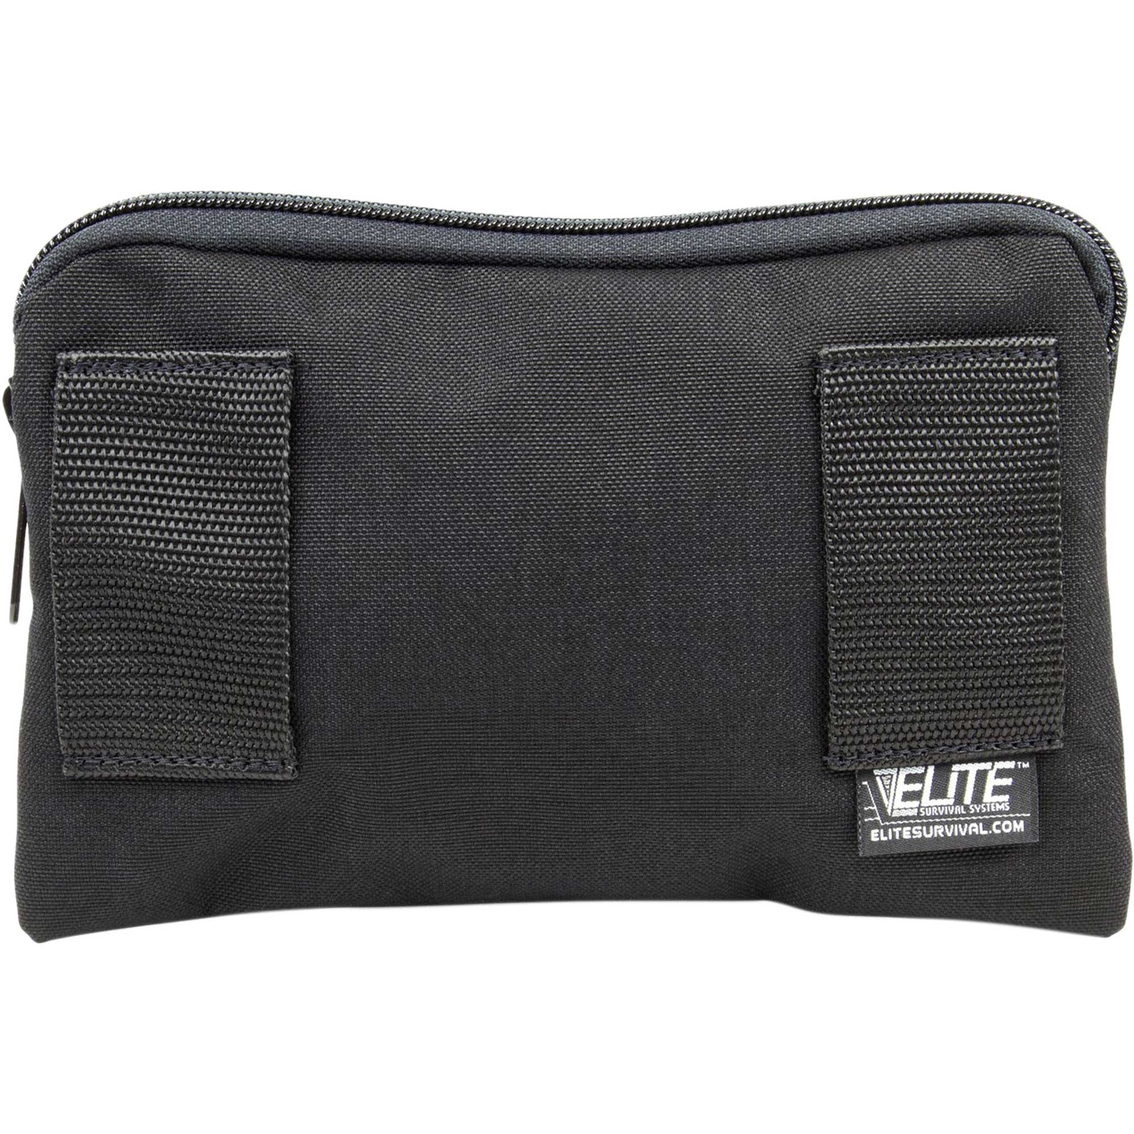 Elite Survival Tactical Systems Ammunition/Accessory Pouch - Image 2 of 3